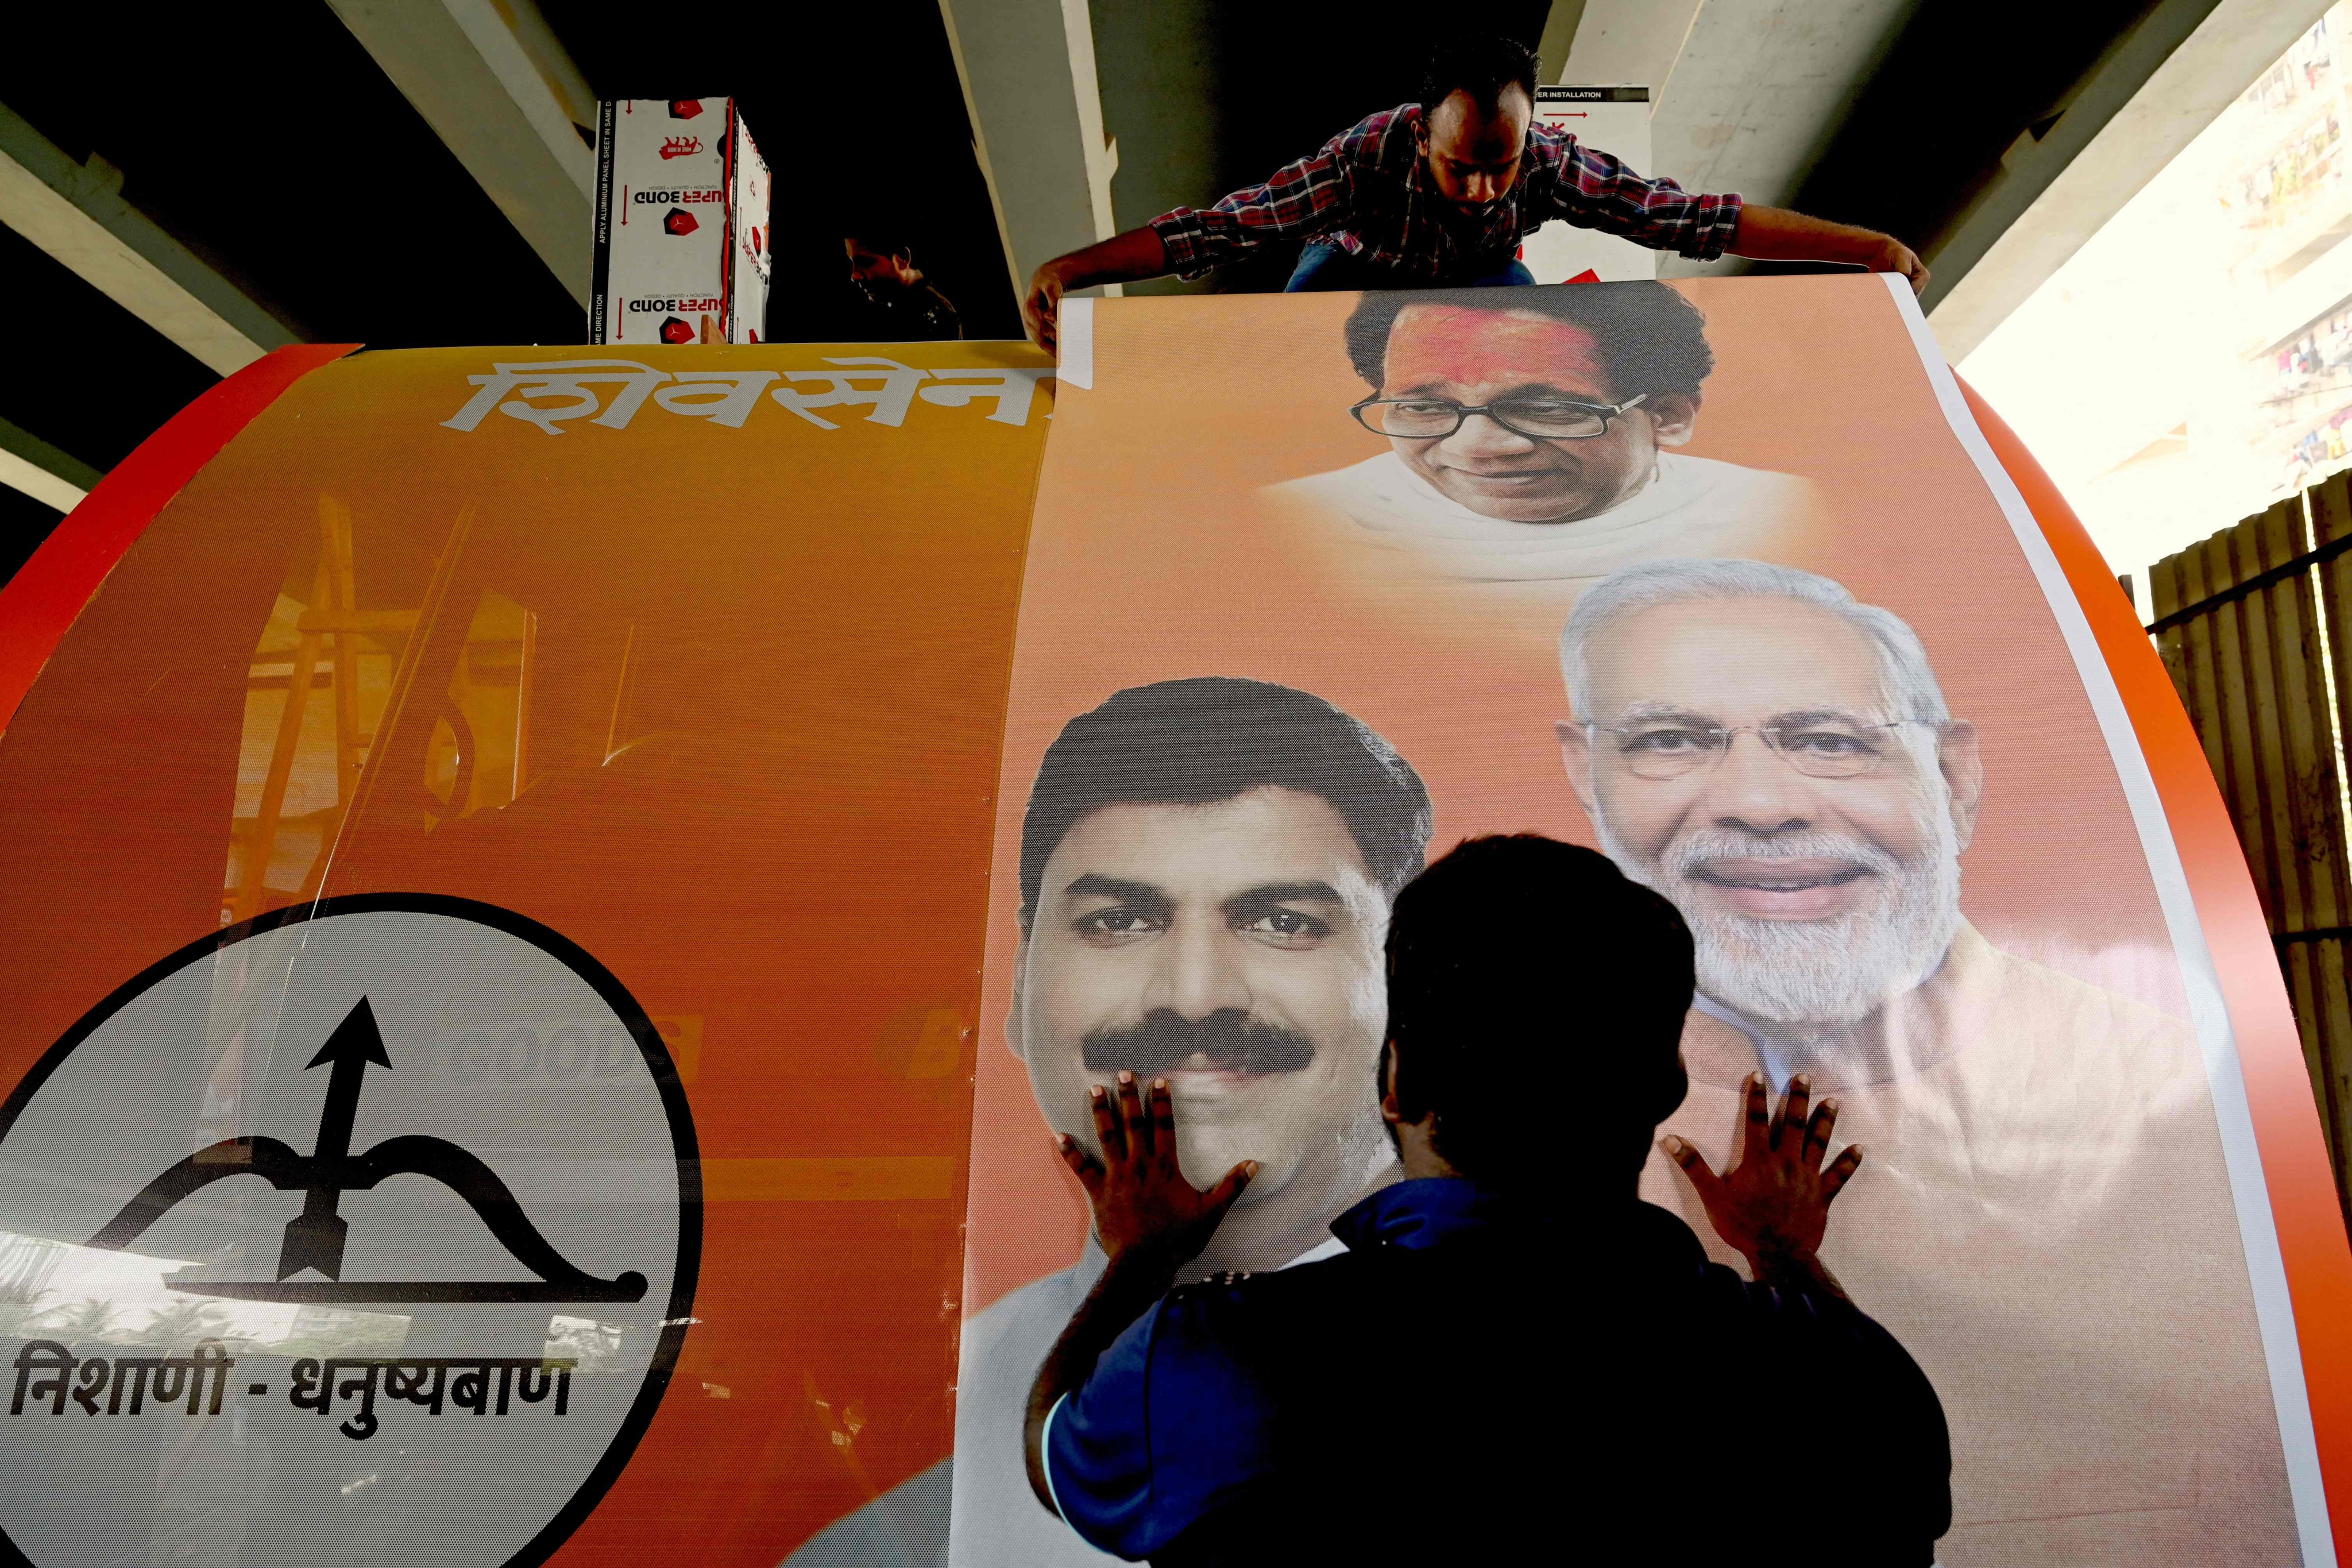 Workers fix a sticker with a photograph of BJP leader and Indian Prime Minister Narendra Modi (right) on an election campaign vehicle in Mumbai on Saturday during the ongoing Indian general election. Photo: AFP